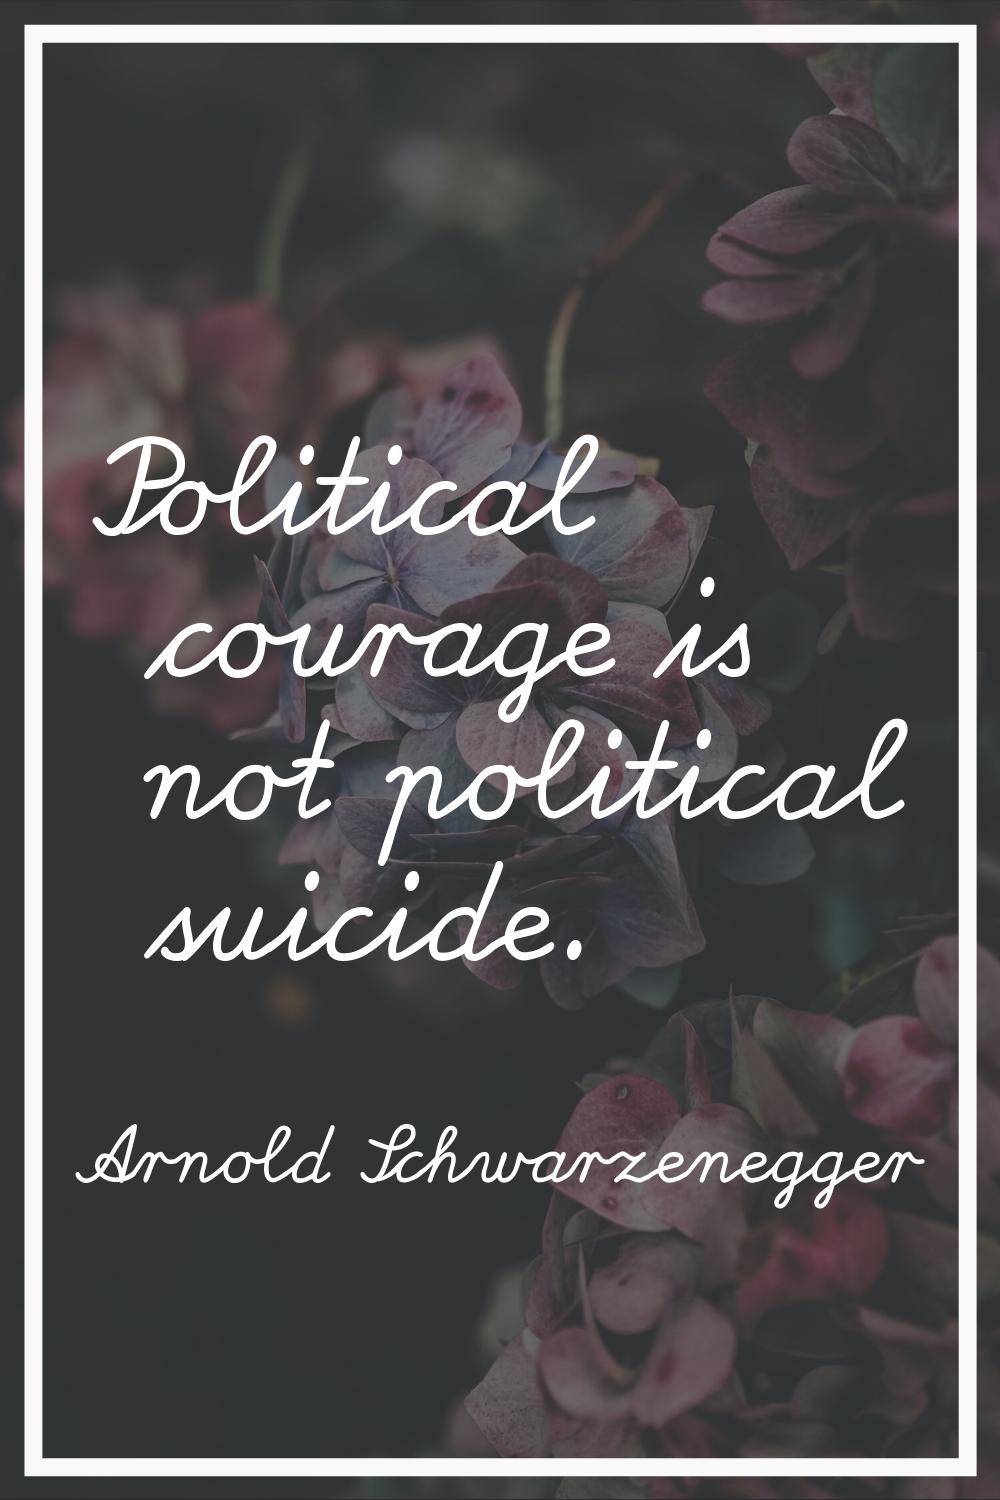 Political courage is not political suicide.